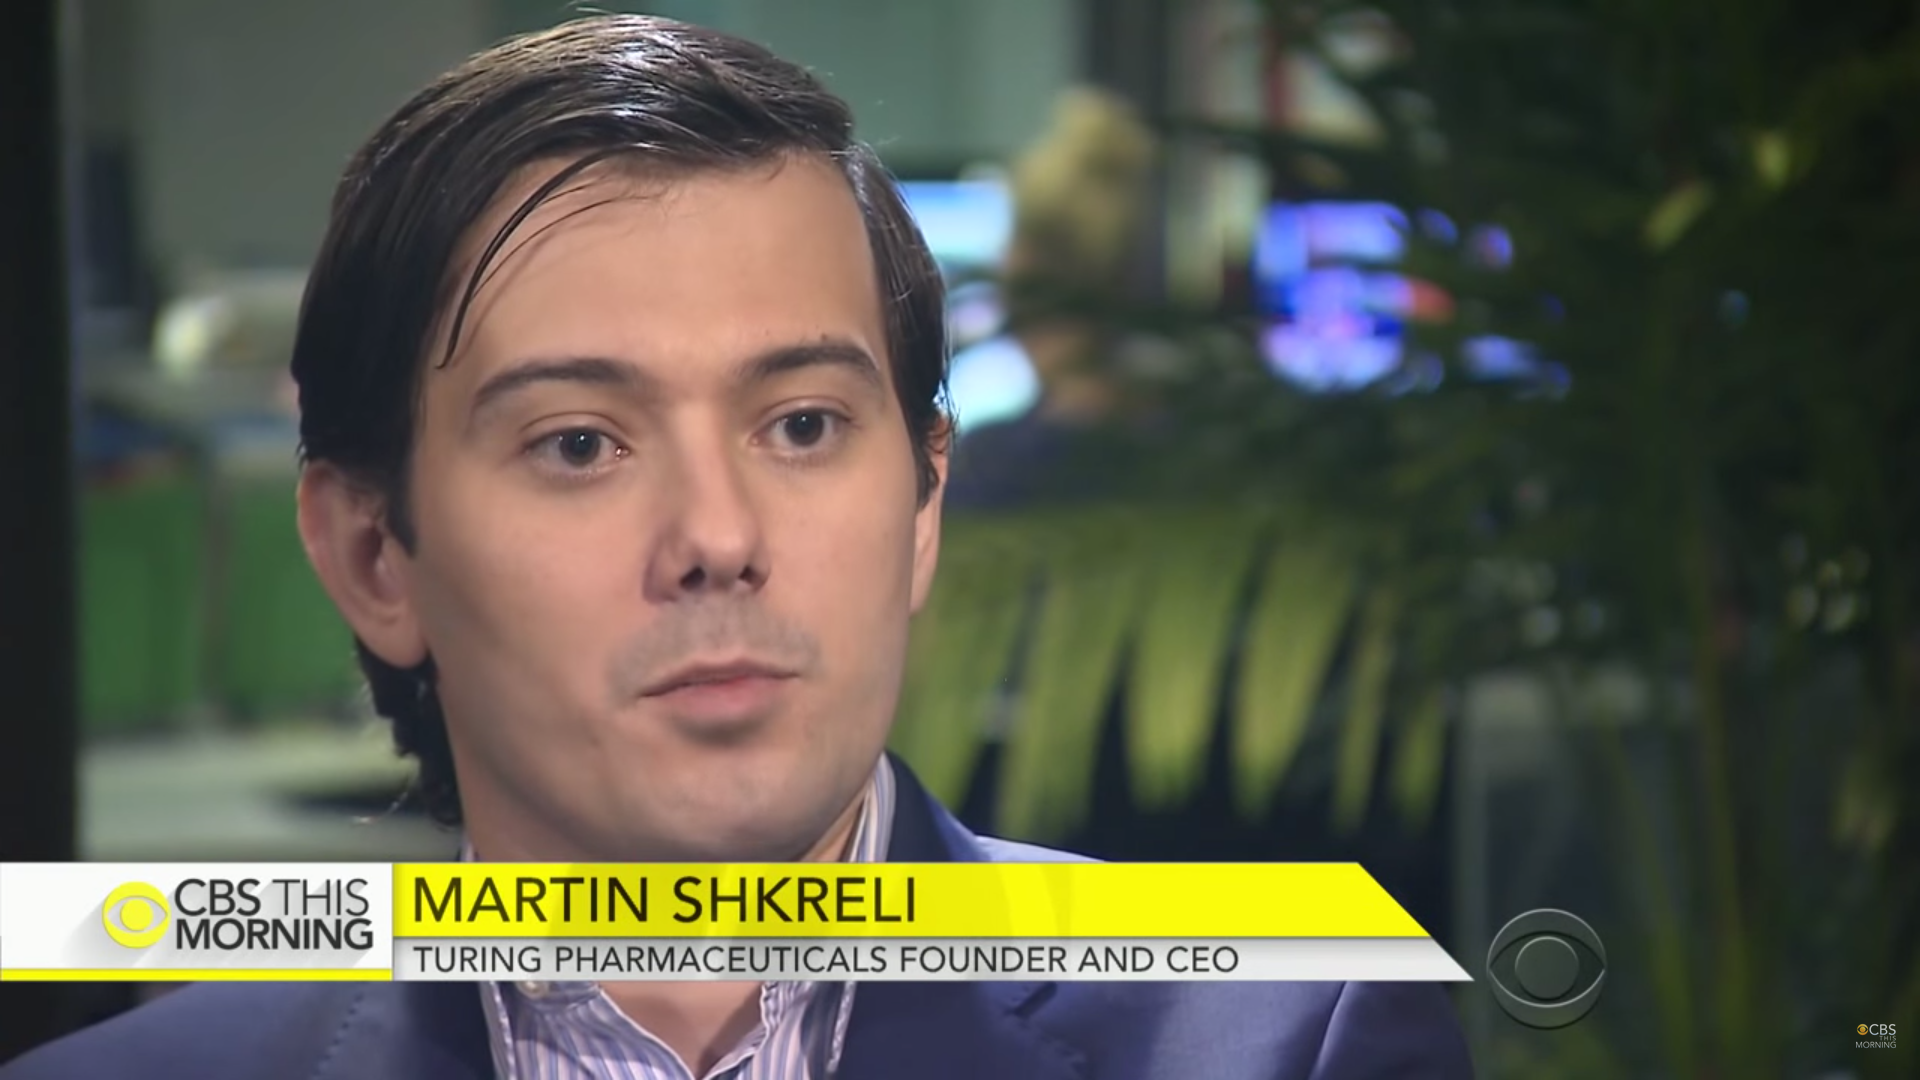 DCI Group aids Turing amid drug price, Shkreli controversies